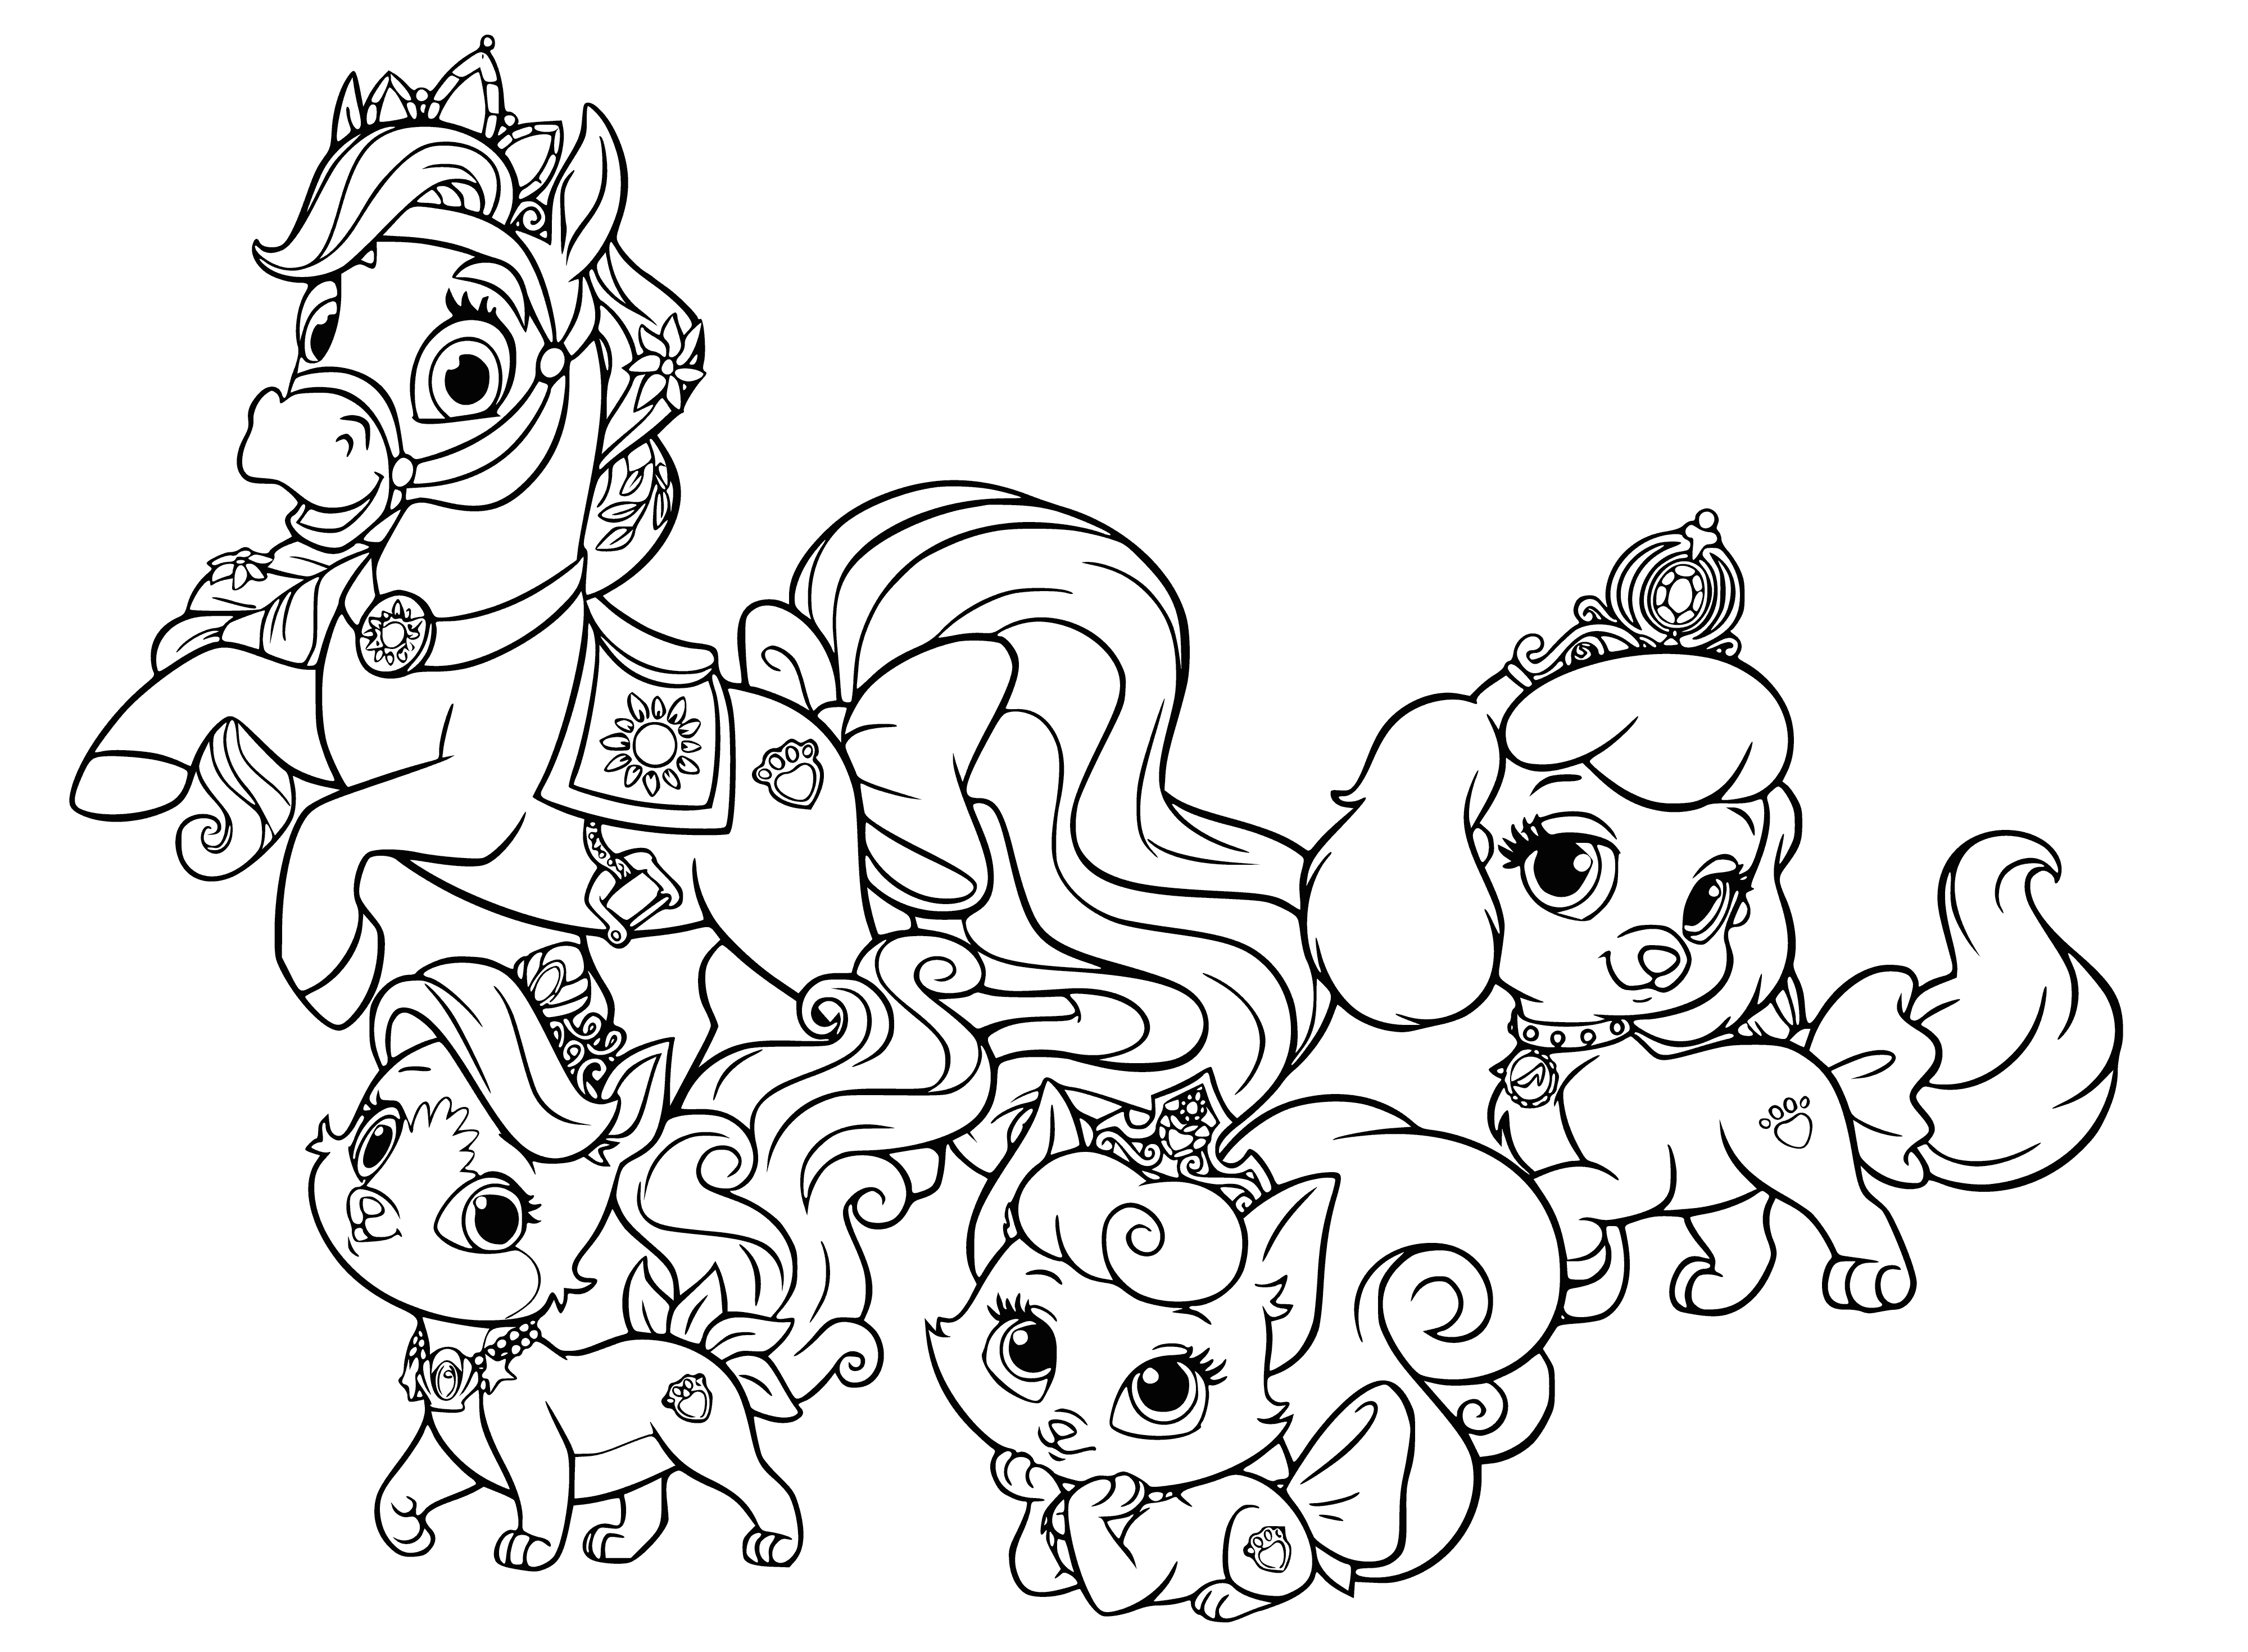 coloring page: Three regal pets seated together: A dog, cat on stacked books, and a mischievous rabbit to the right, looking like treasured companions.